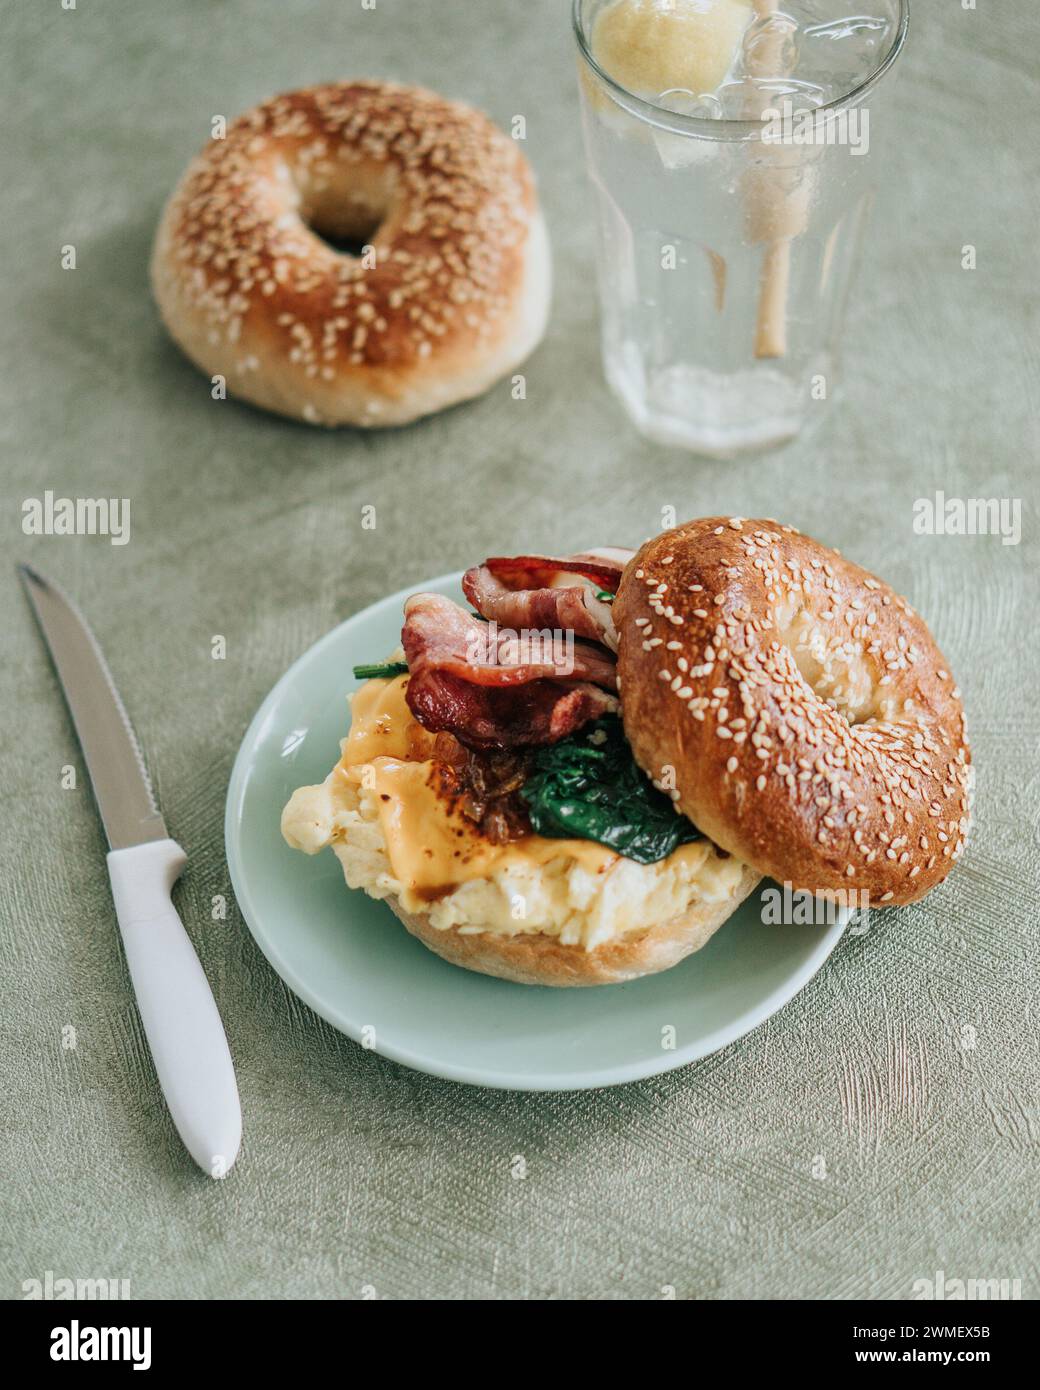 A toasted bagel breakfast sandwich with eggs, spinach, and bacon on a green plate Stock Photo